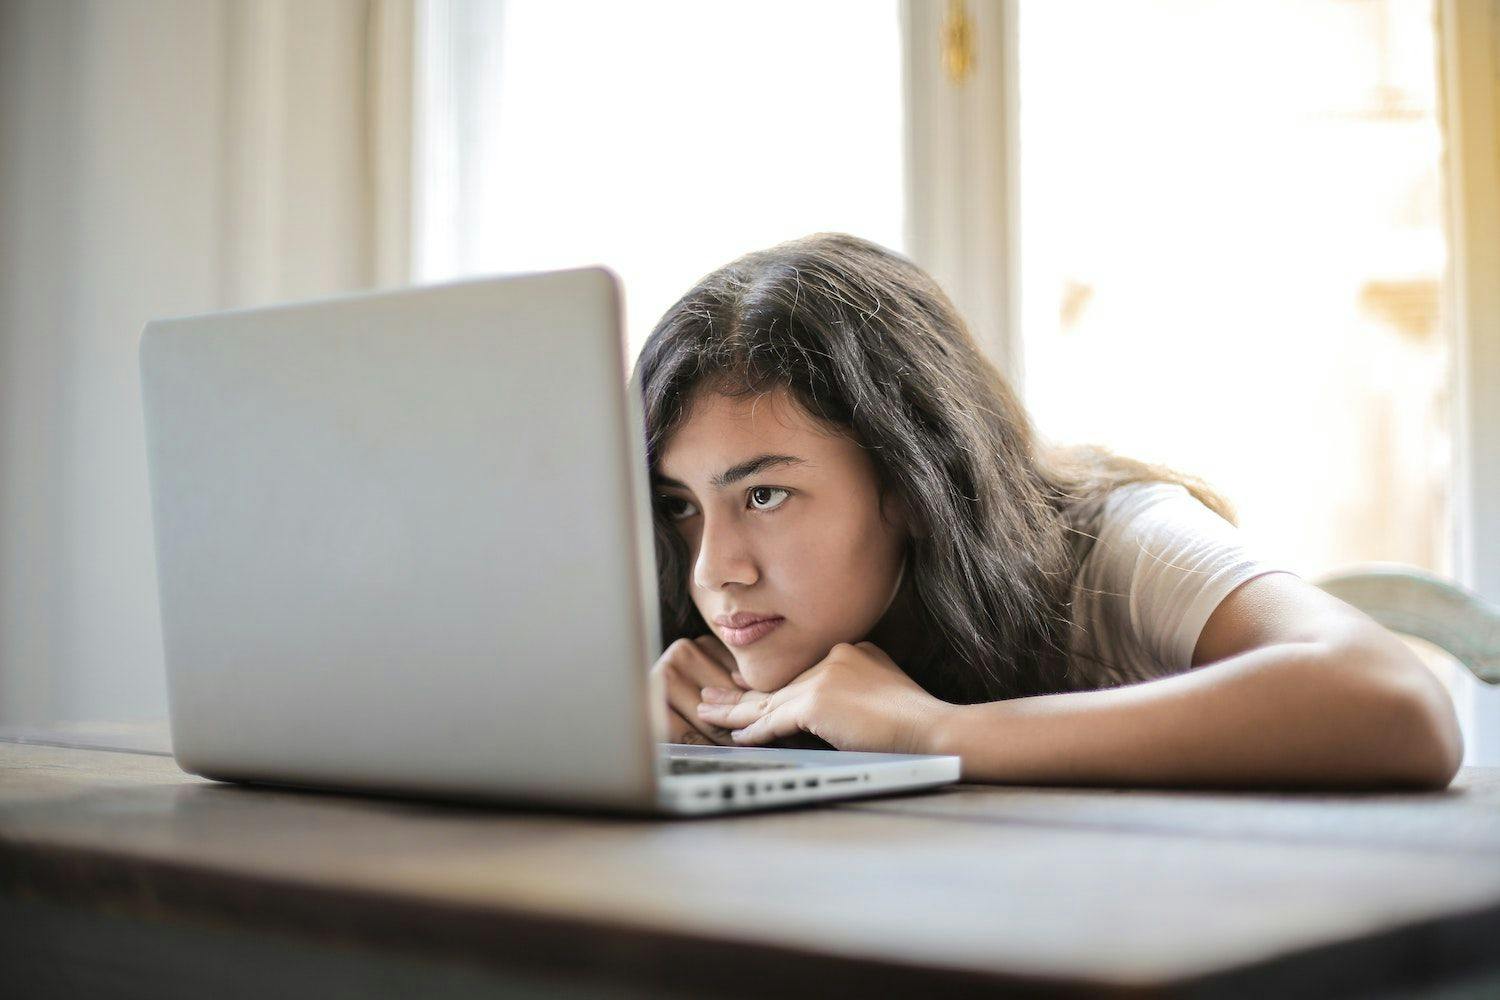 7 ways to protect yourself from bullies online